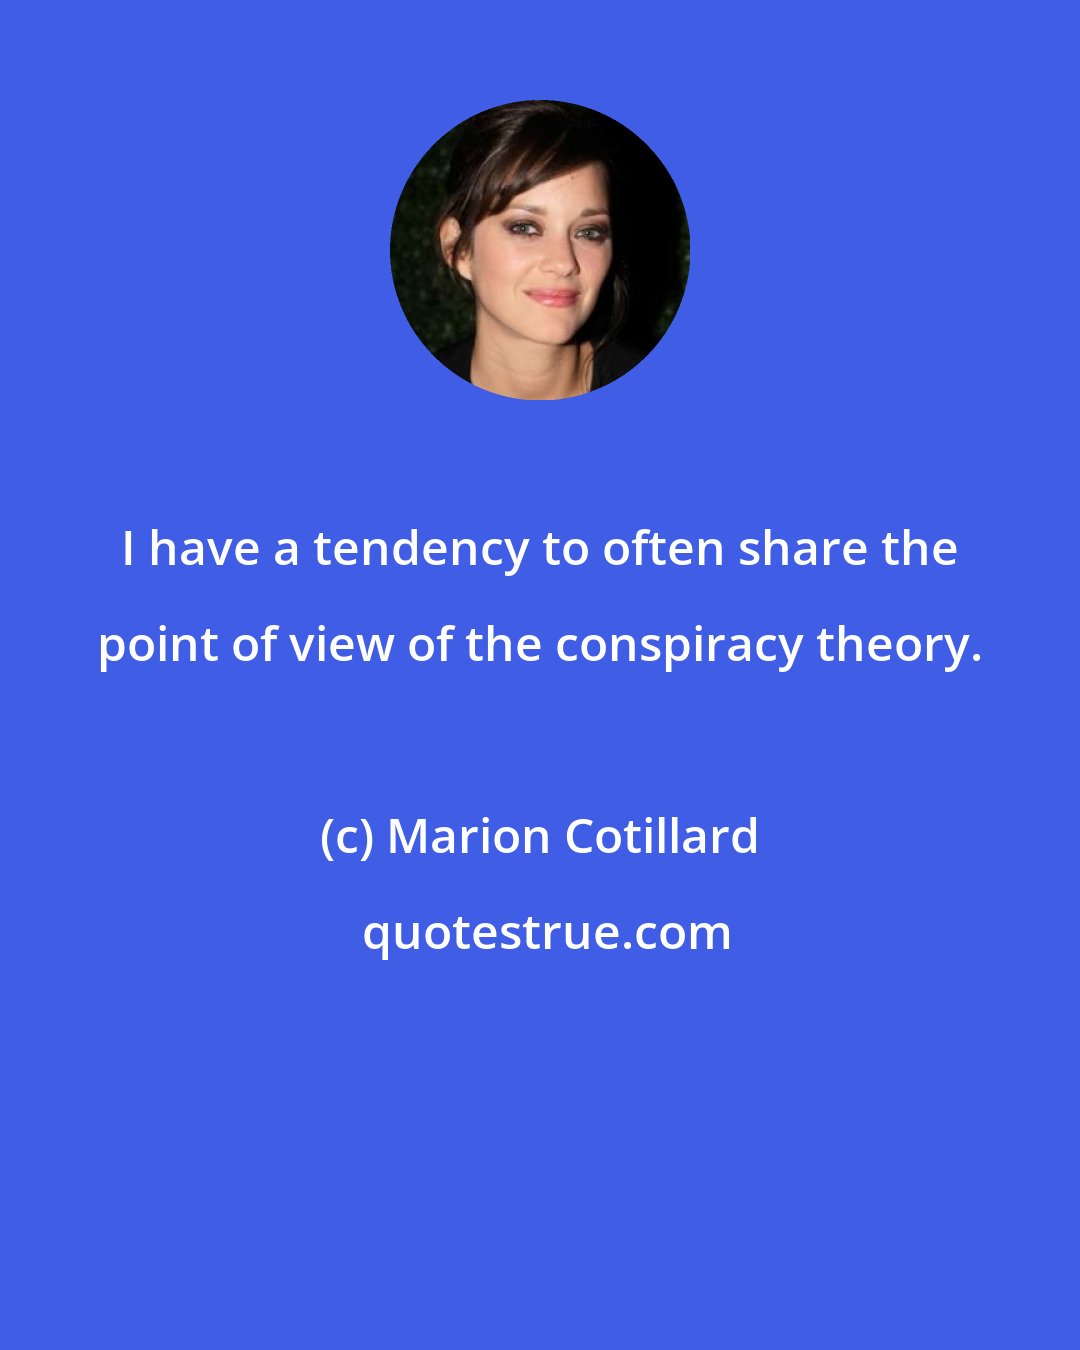 Marion Cotillard: I have a tendency to often share the point of view of the conspiracy theory.